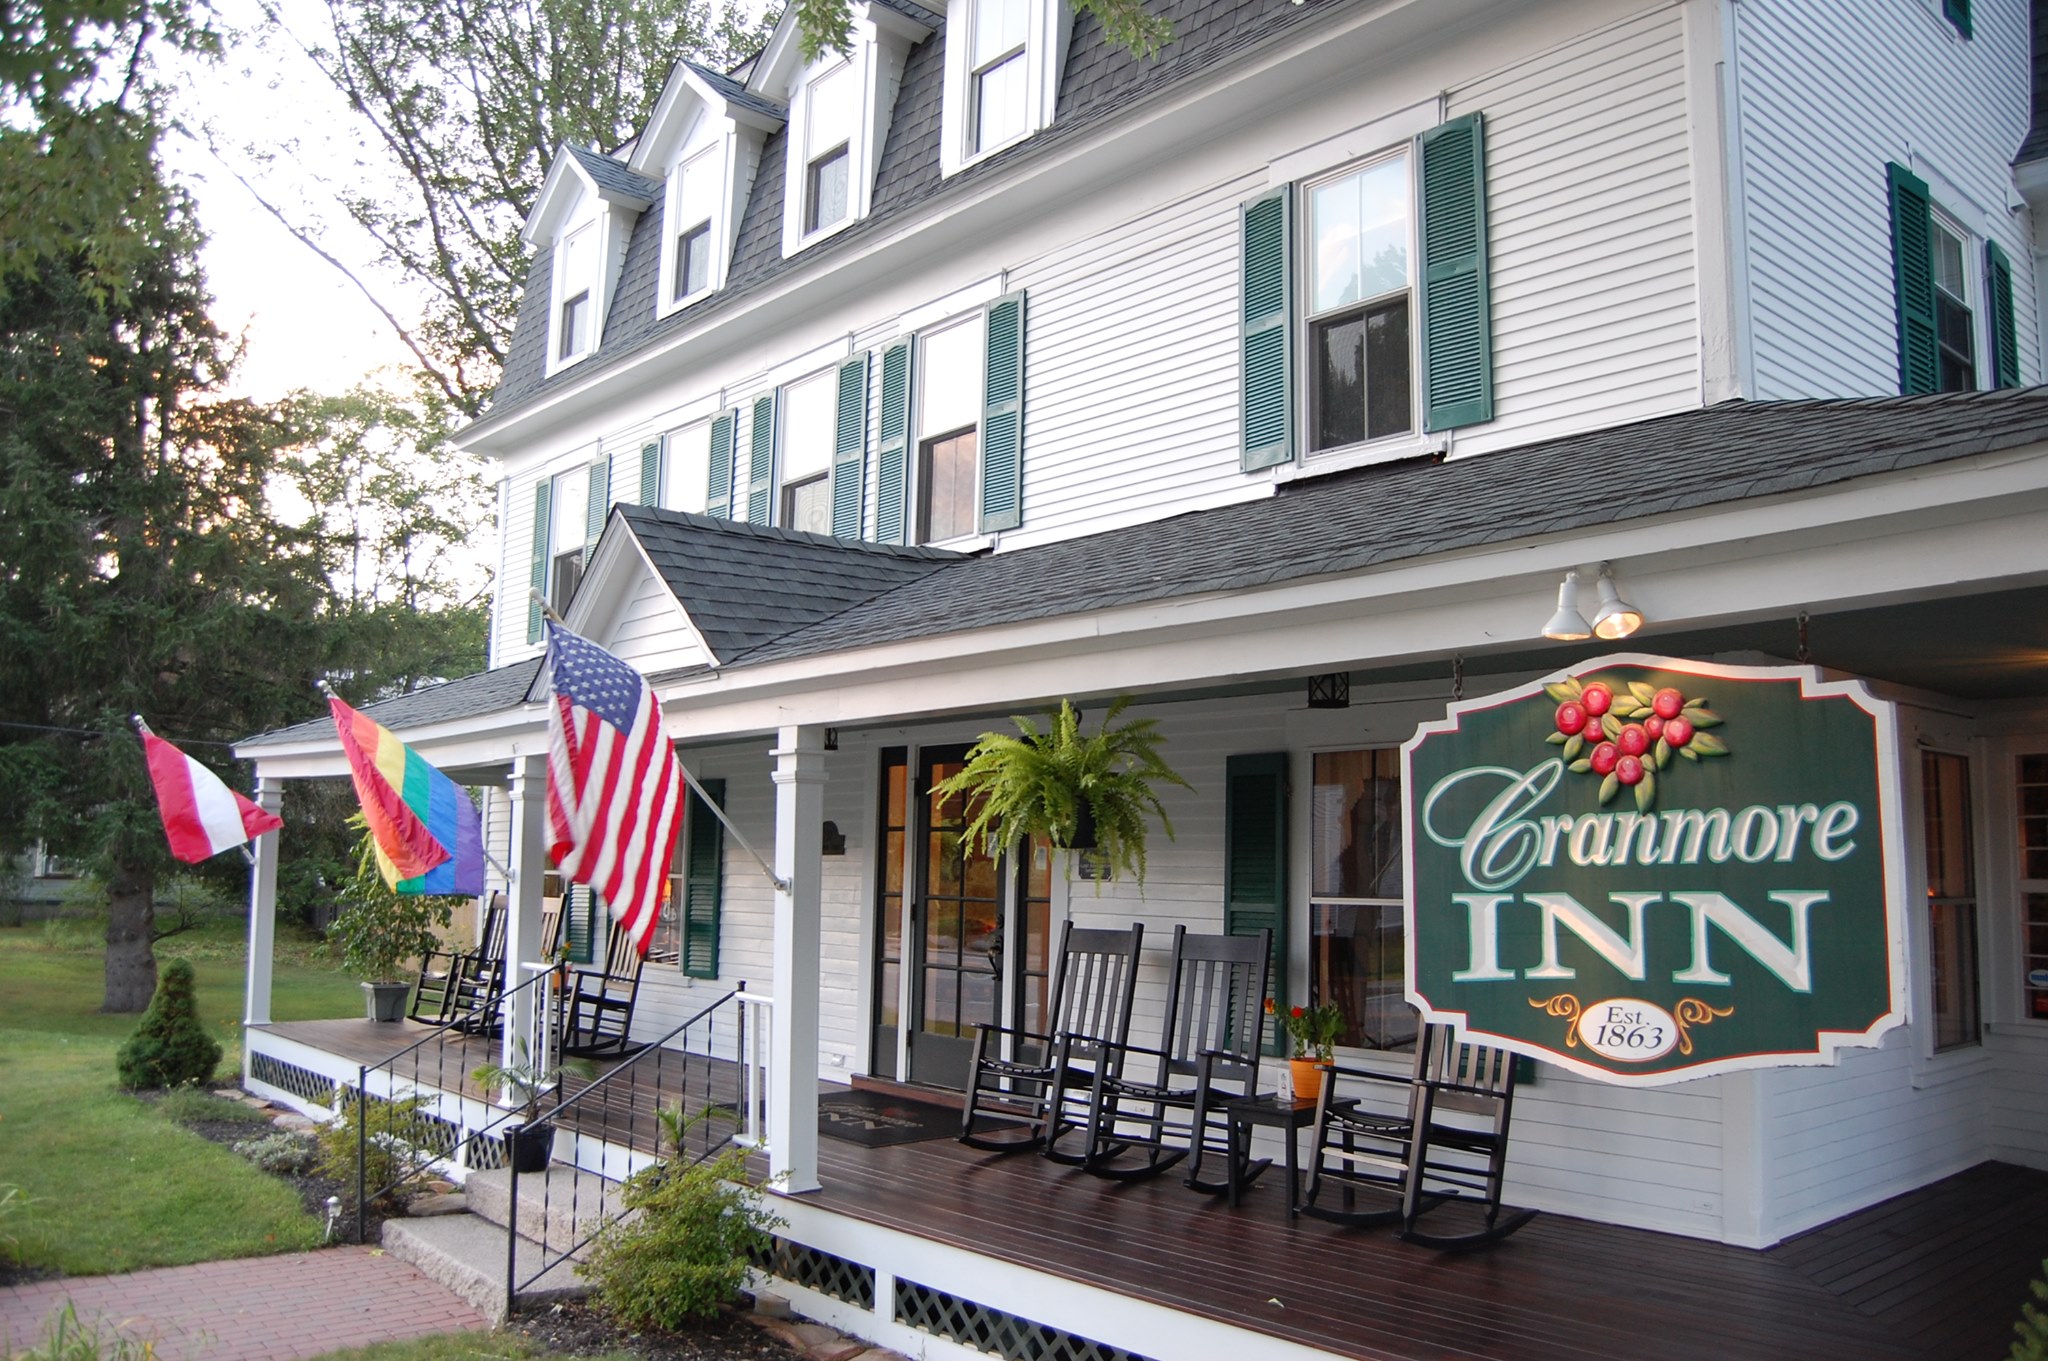 photo of The Cranmore Inn in North Conway, New Hampshire